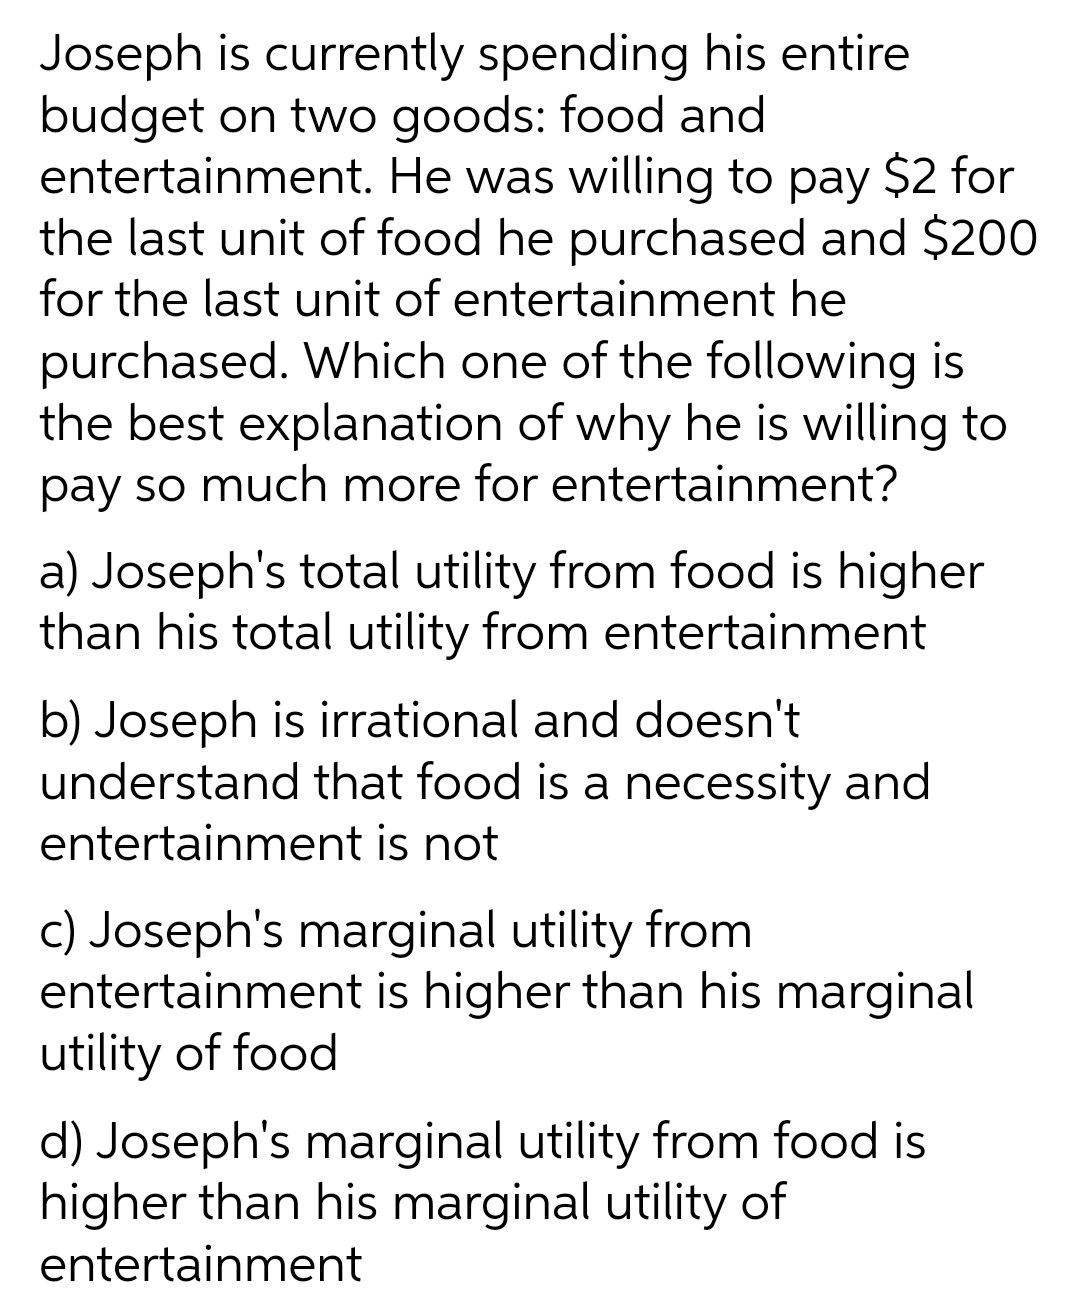 Joseph is currently spending his entire
budget on two goods: food and
entertainment. He was willing to pay $2 for
the last unit of food he purchased and $200
for the last unit of entertainment he
purchased. Which one of the following is
the best explanation of why he is willing to
pay so much more for entertainment?
a) Joseph's total utility from food is higher
than his total utility from entertainment
b) Joseph is irrational and doesn't
understand that food is a necessity and
entertainment is not
c) Joseph's marginal utility from
entertainment is higher than his marginal
utility of food
d) Joseph's marginal utility from food is
higher than his marginal utility of
entertainment
